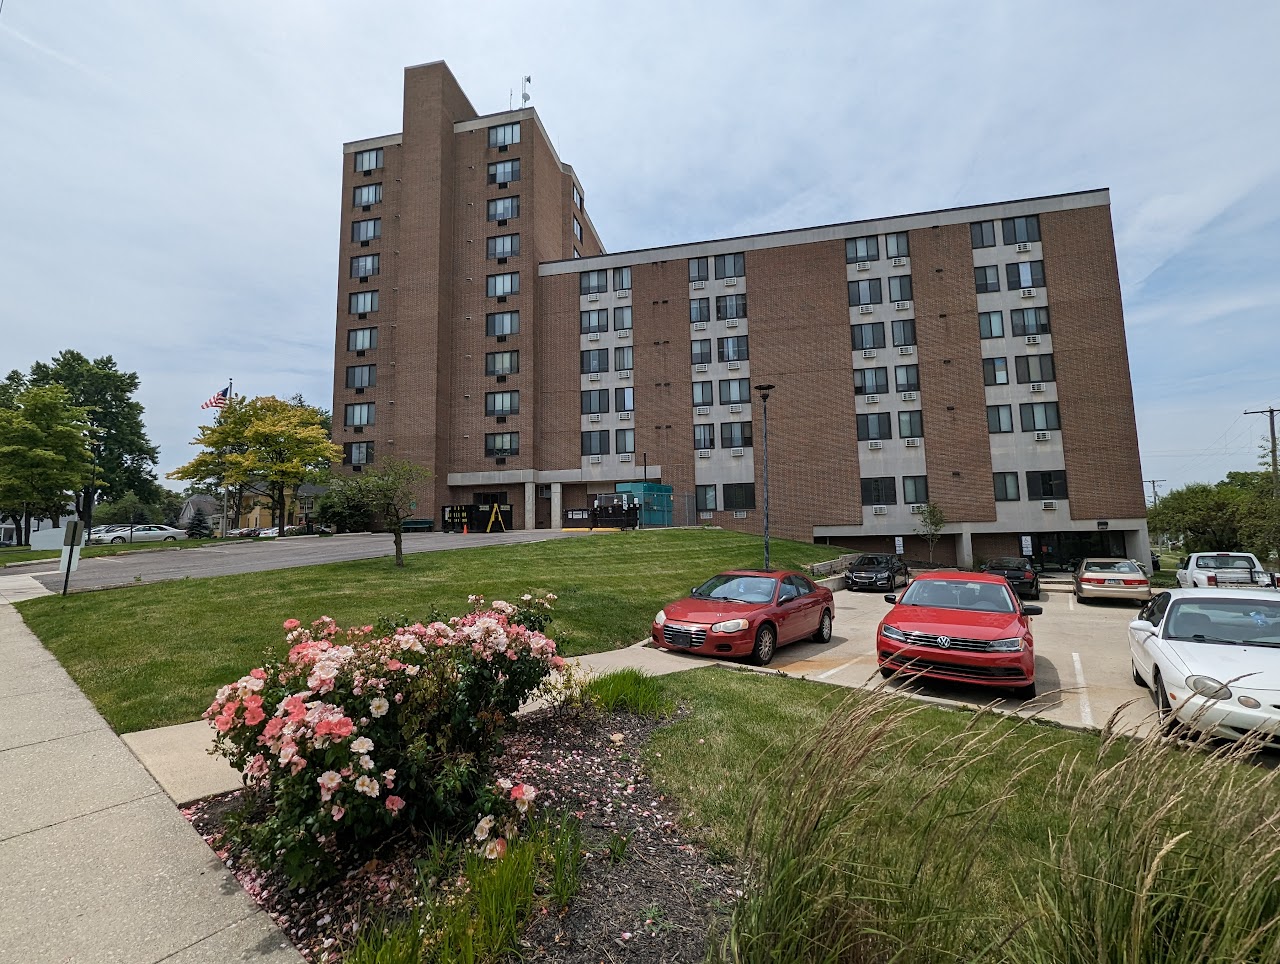 Photo of MARION TOWERS II. Affordable housing located at 400 DELAWARE AVENUE MARION, OH 43302